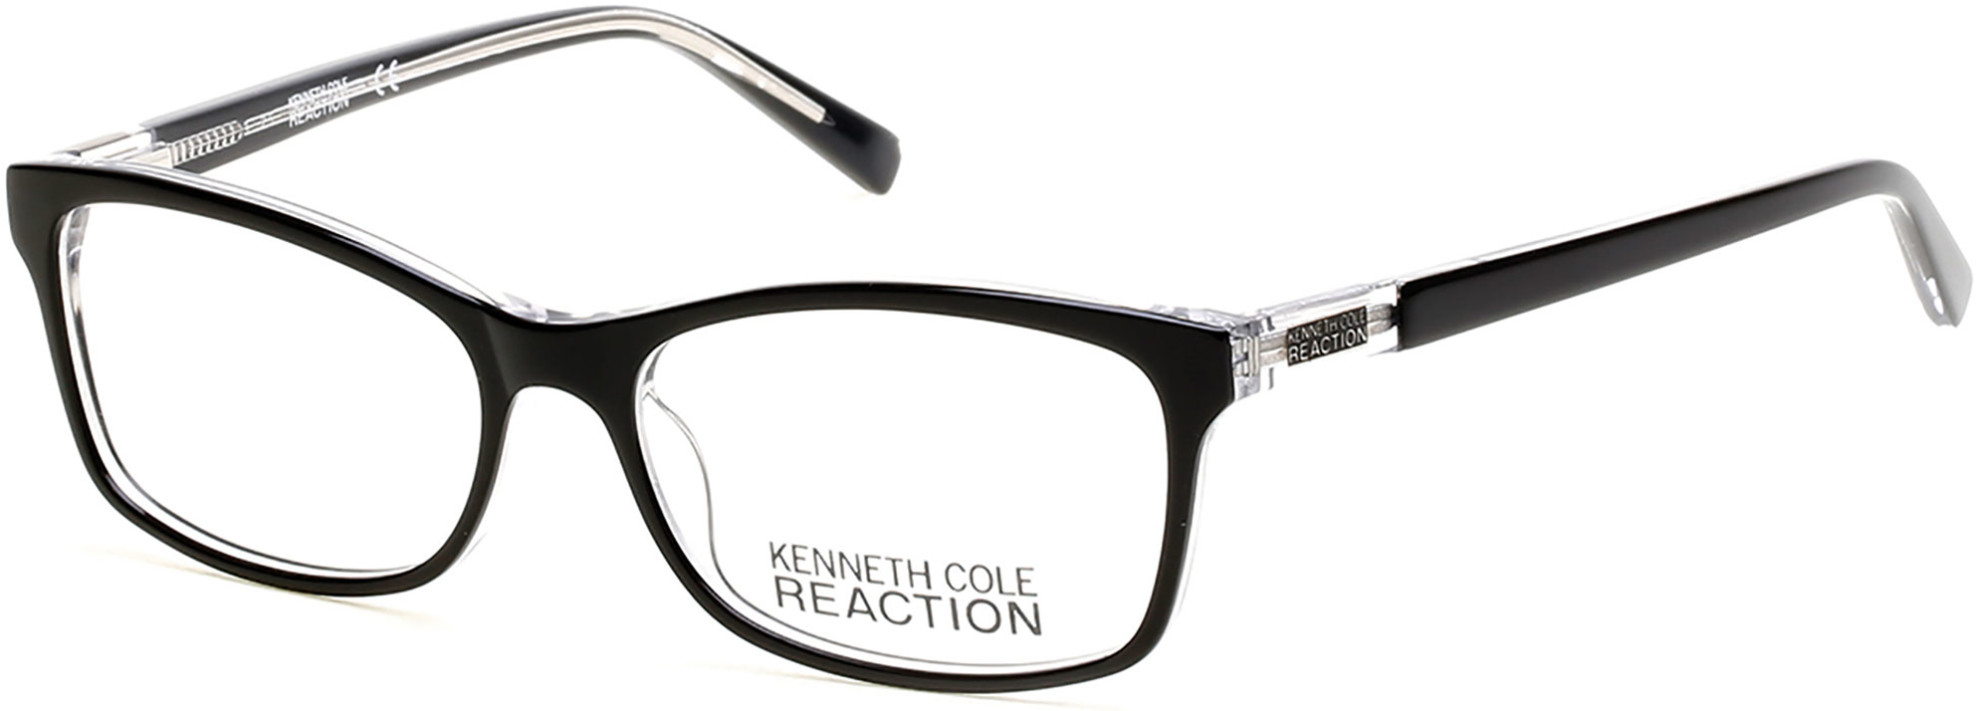 KENNETH COLE NY 0781 003